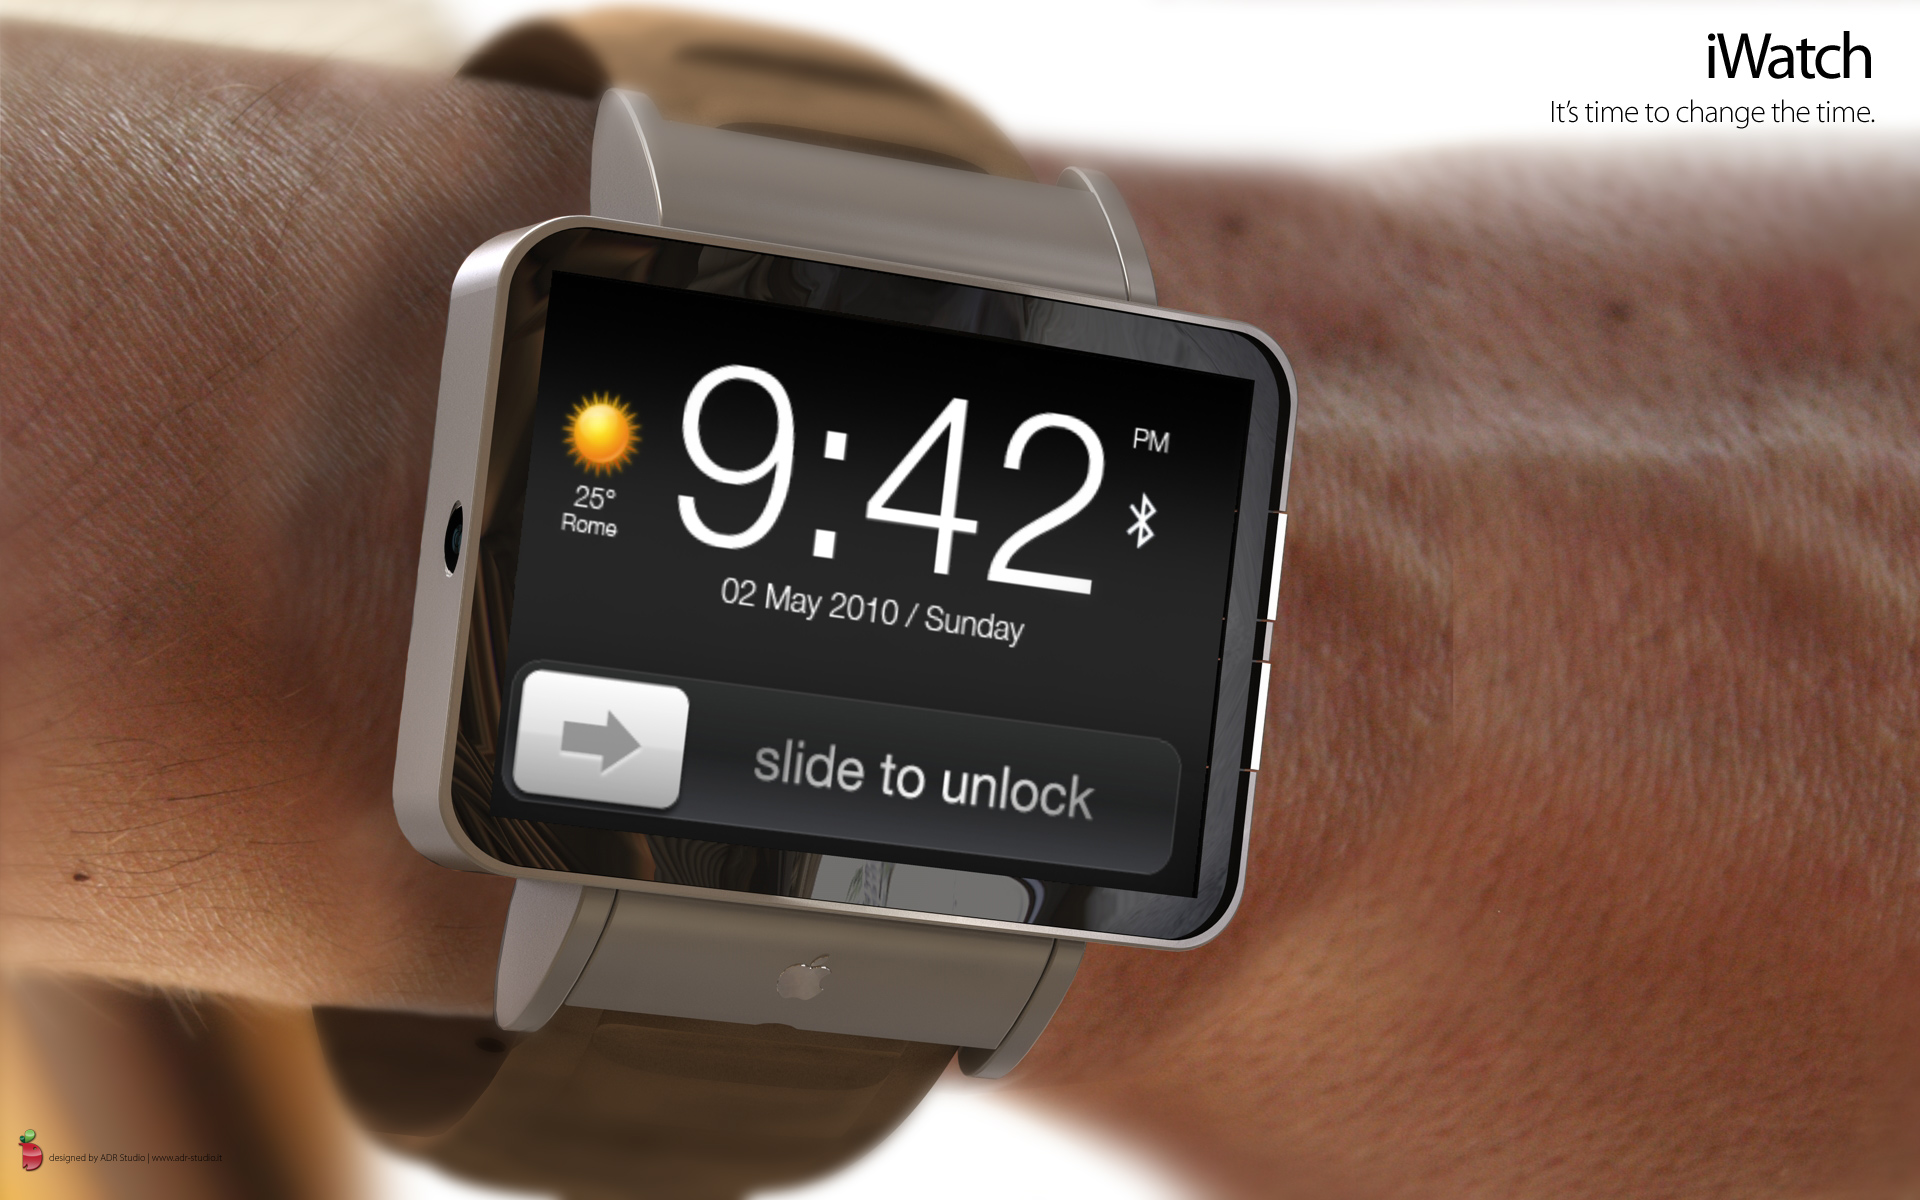 Rumor: Apple and Intel would be working together to launch a smartwatch in 2013